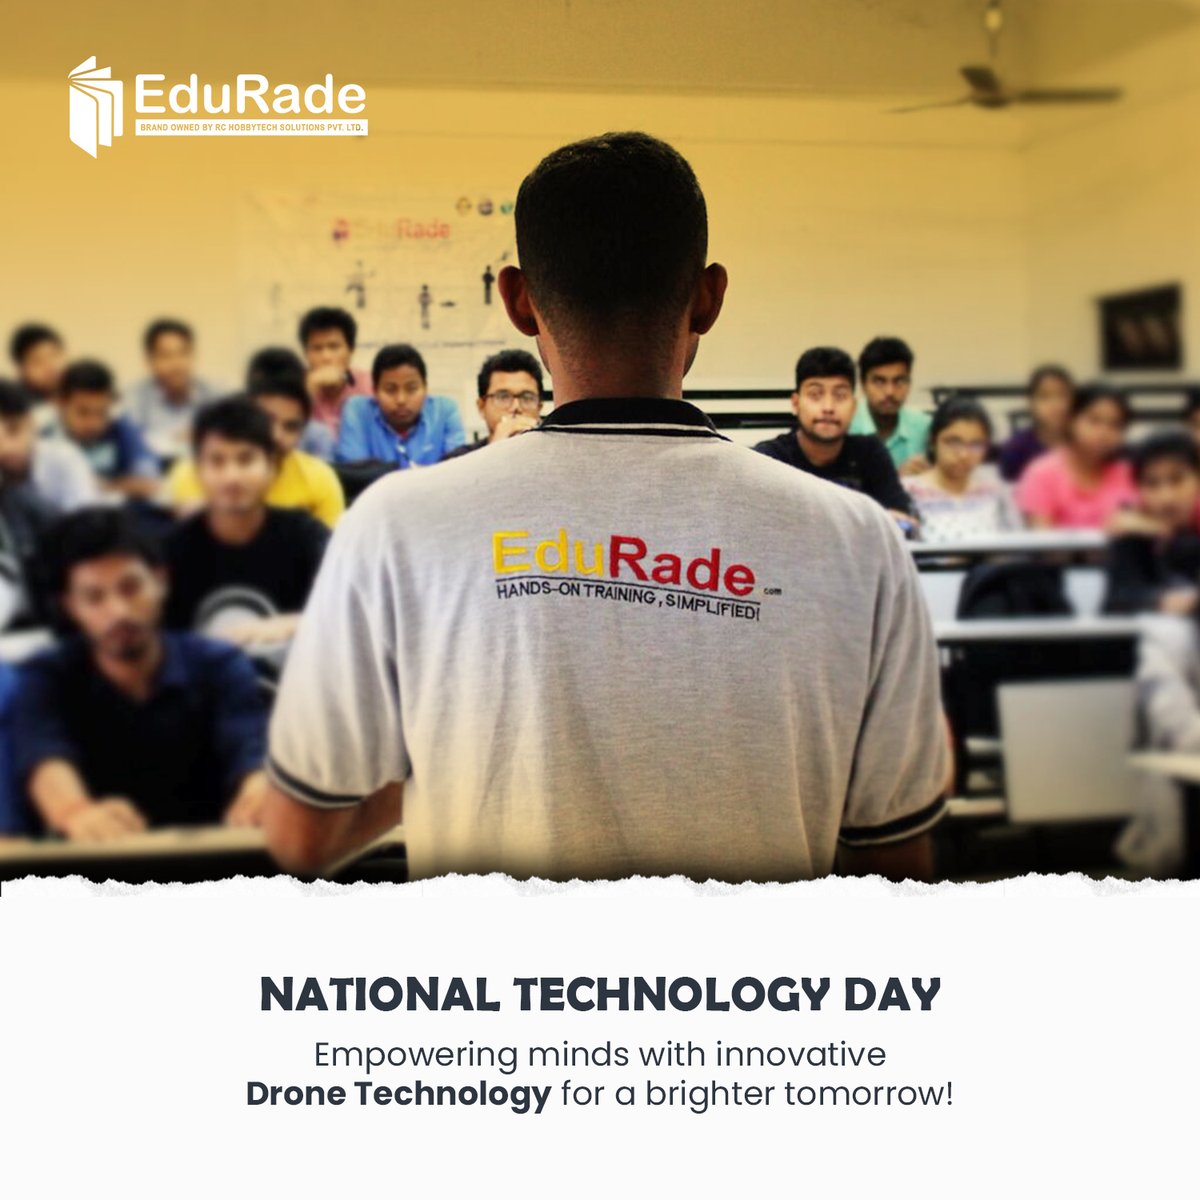 Happy National Technology Day from EduRade!

We celebrate technology's impact on #drone aviation and our certified pilot training. 

Empowering individuals with cutting-edge knowledge for safer, smarter skies. 

#NationalTechnologyDay #EduRade #DroneEducation #TechForTomorrow